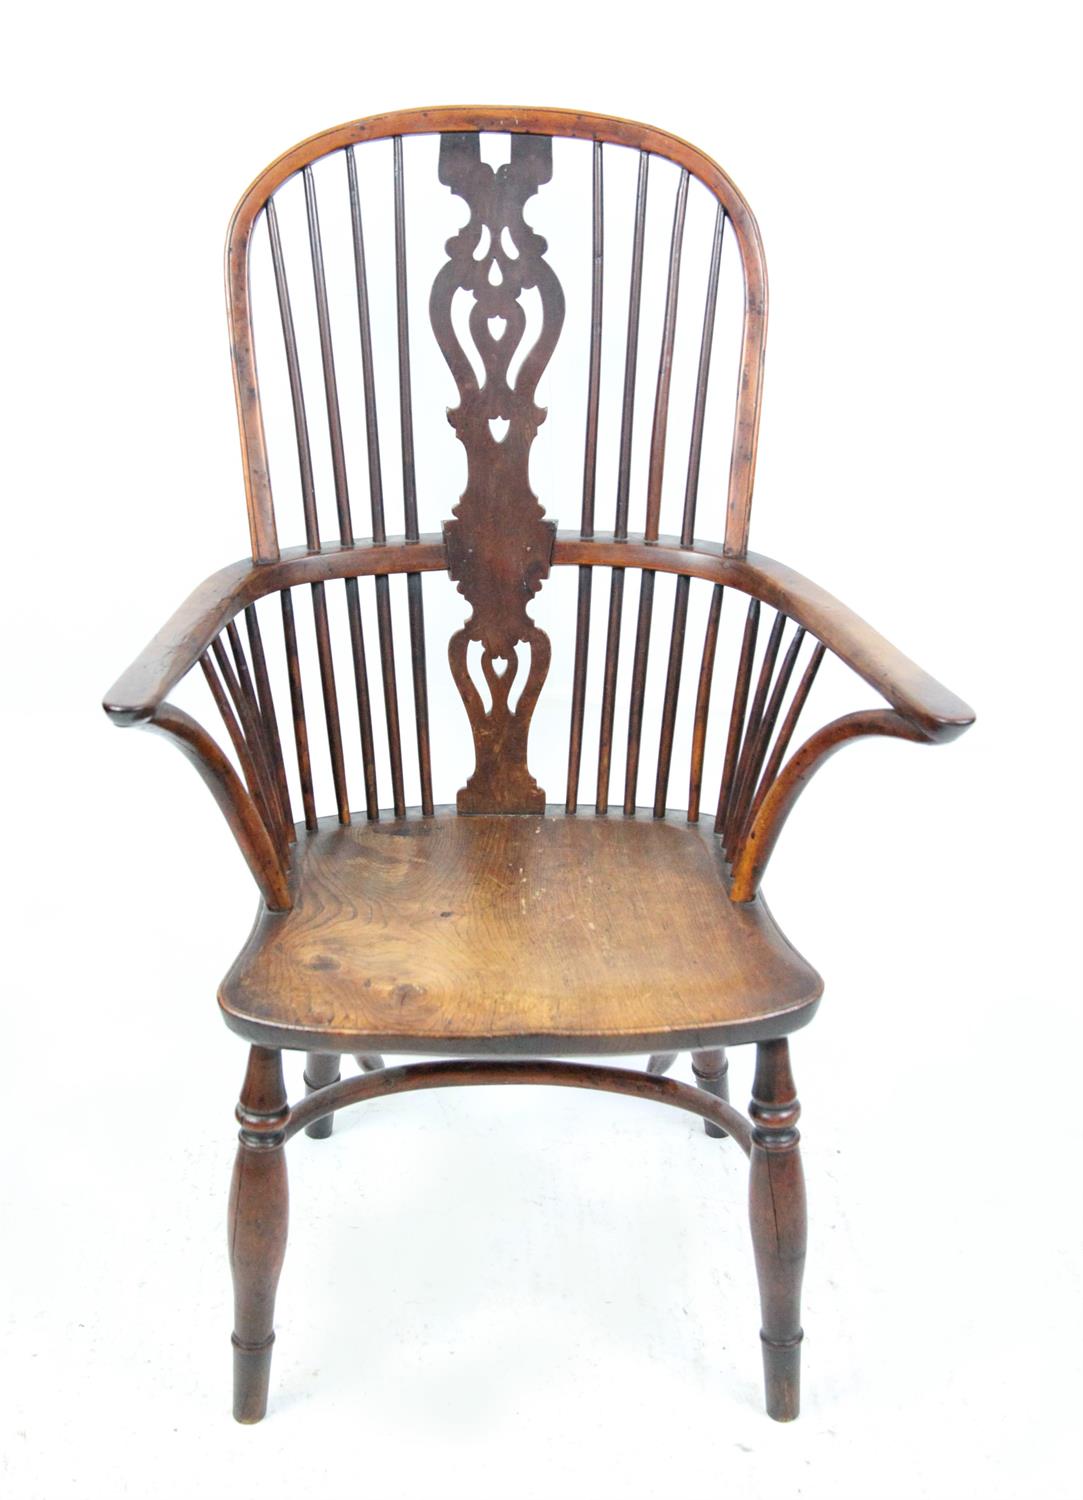 19th century yew wood and elm Windsor high hoop back chair on turned legs joined by crinoline